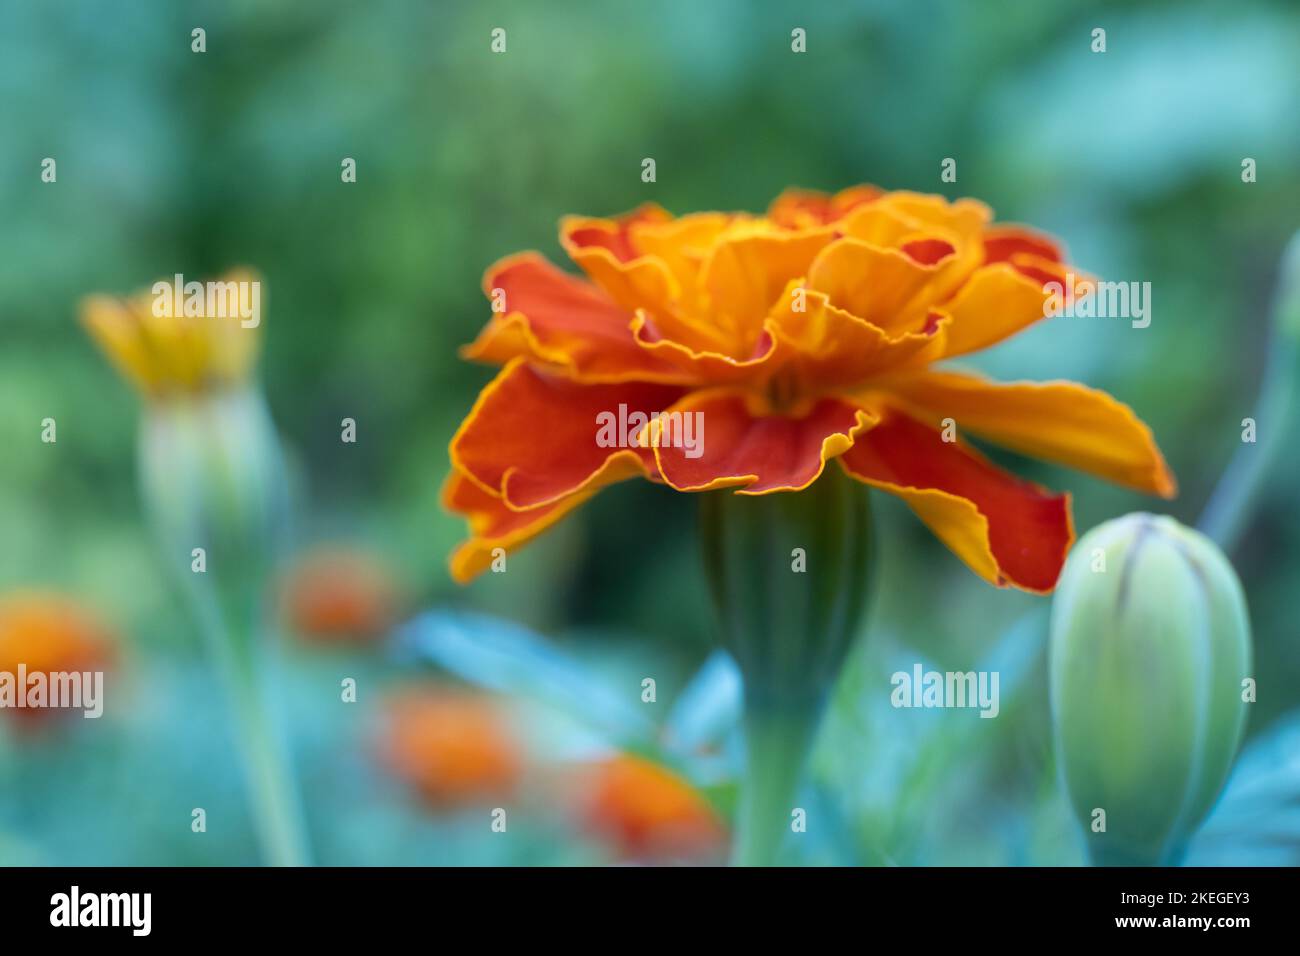 Marigold Red Brocade flower. Mass of red and yellow flowers Stock Photo